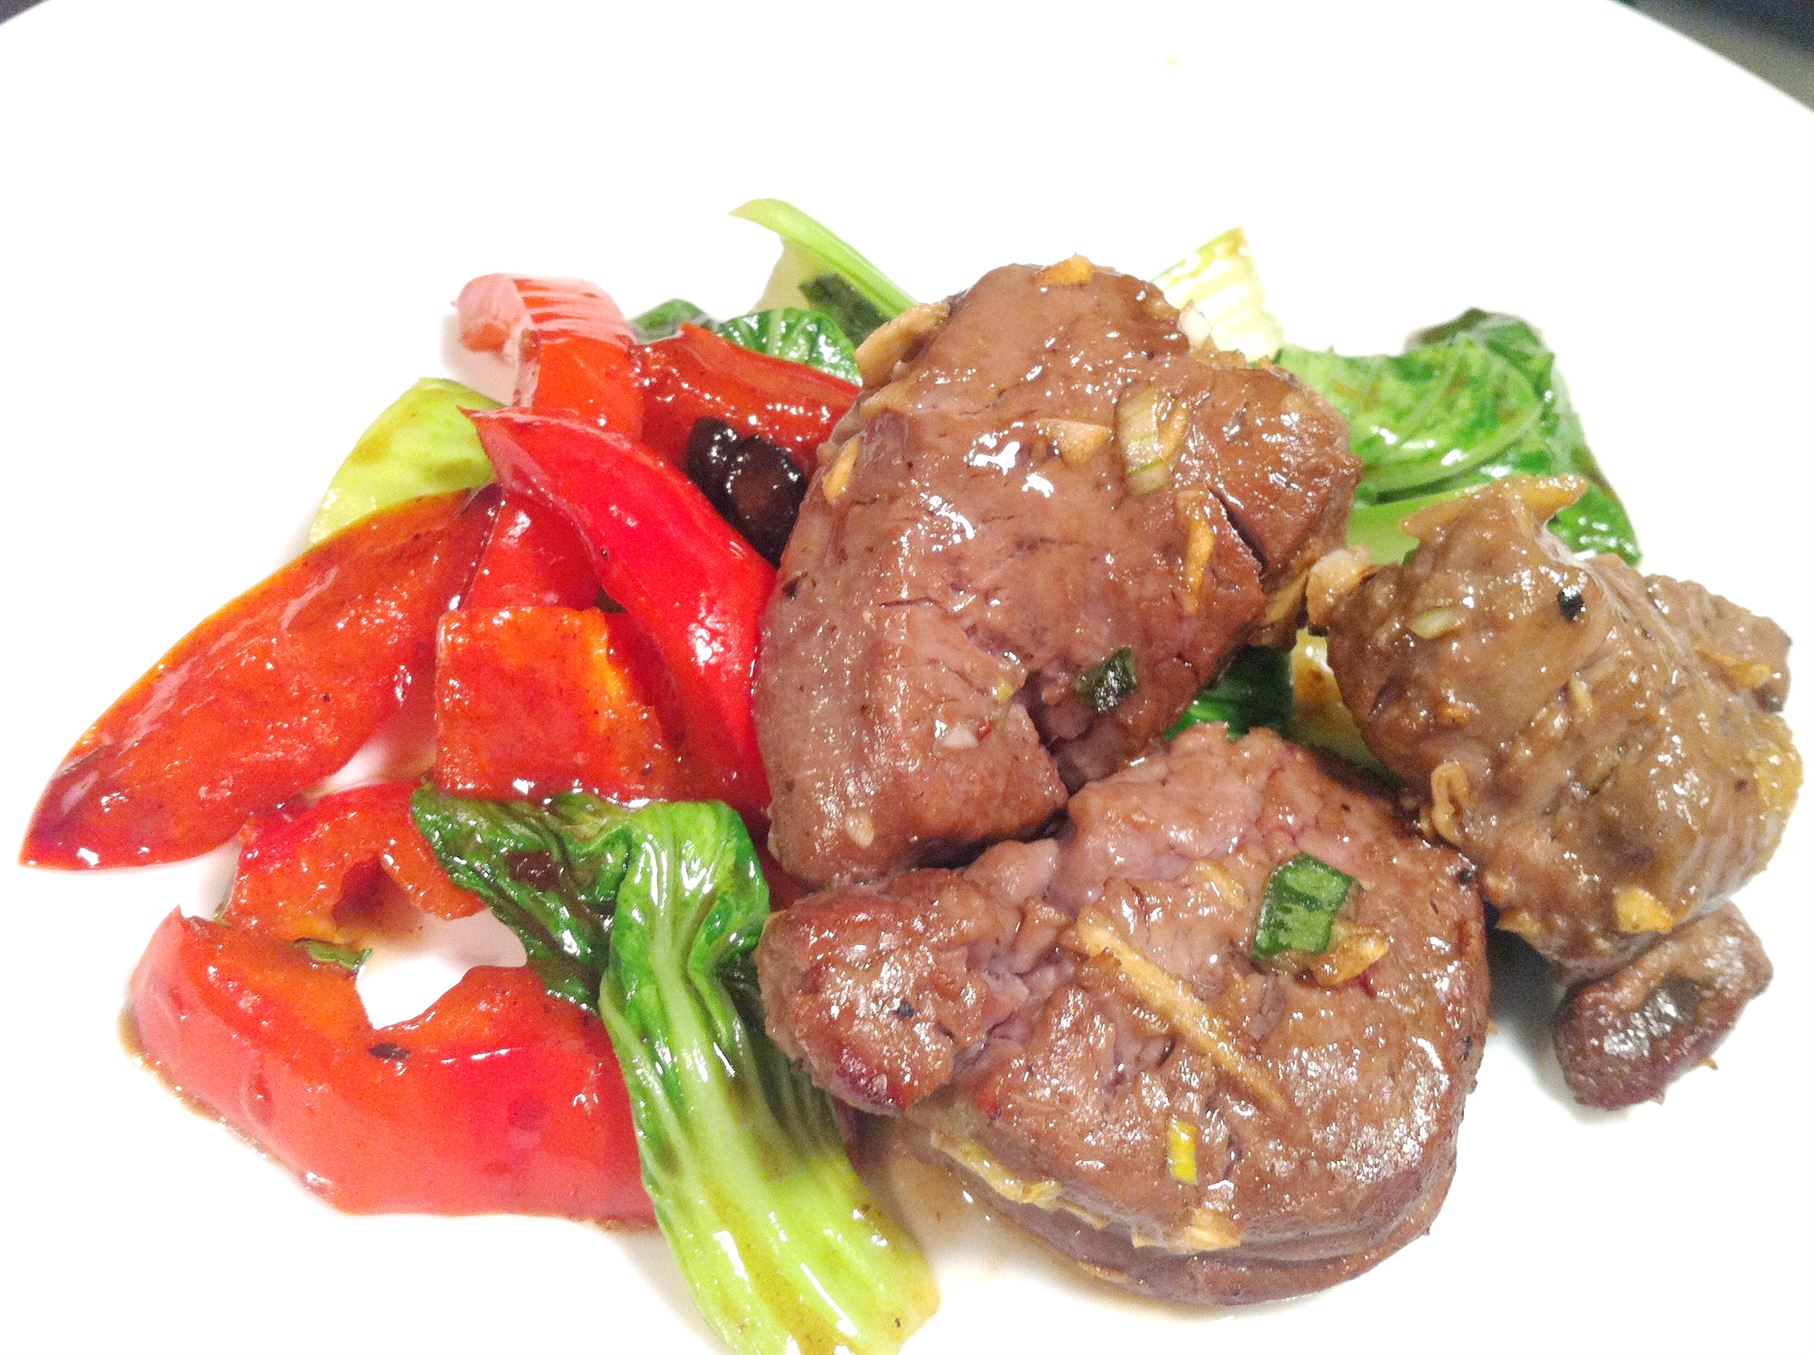 Ken Homs Korean Grilled Beef with Stir-Fried Peppers and Baby Pak Choy, Lay The Table